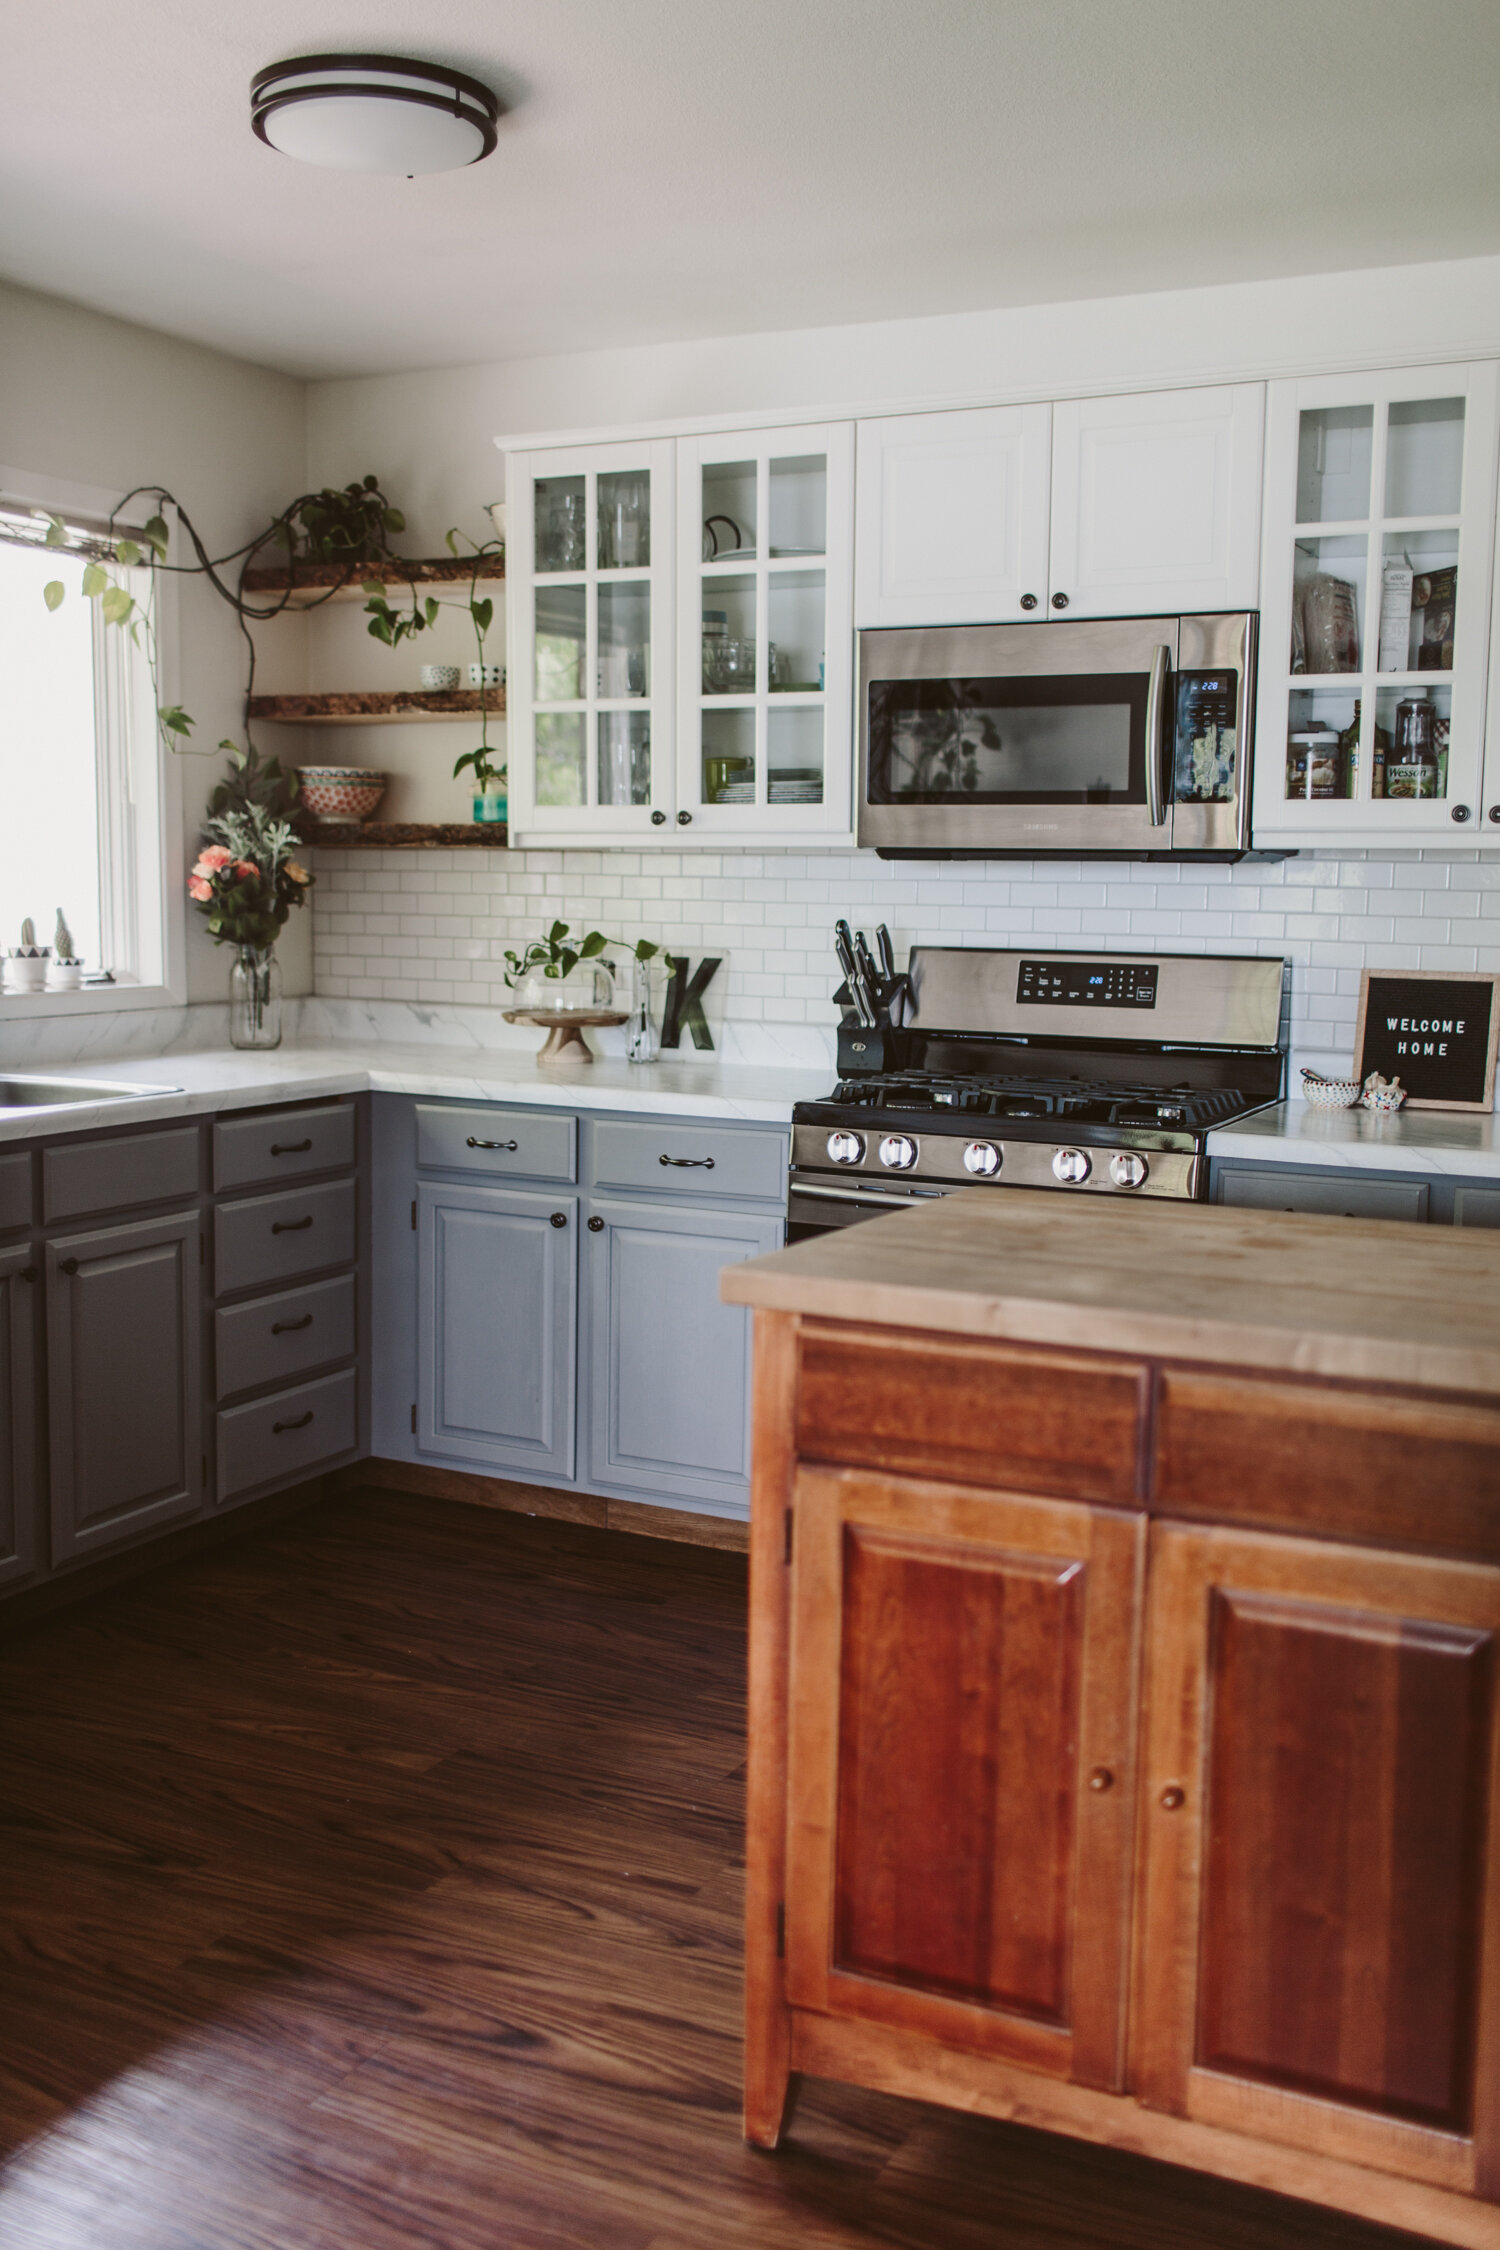 Transform Your Kitchen With Diy Painted Cabinets Liz Morrow